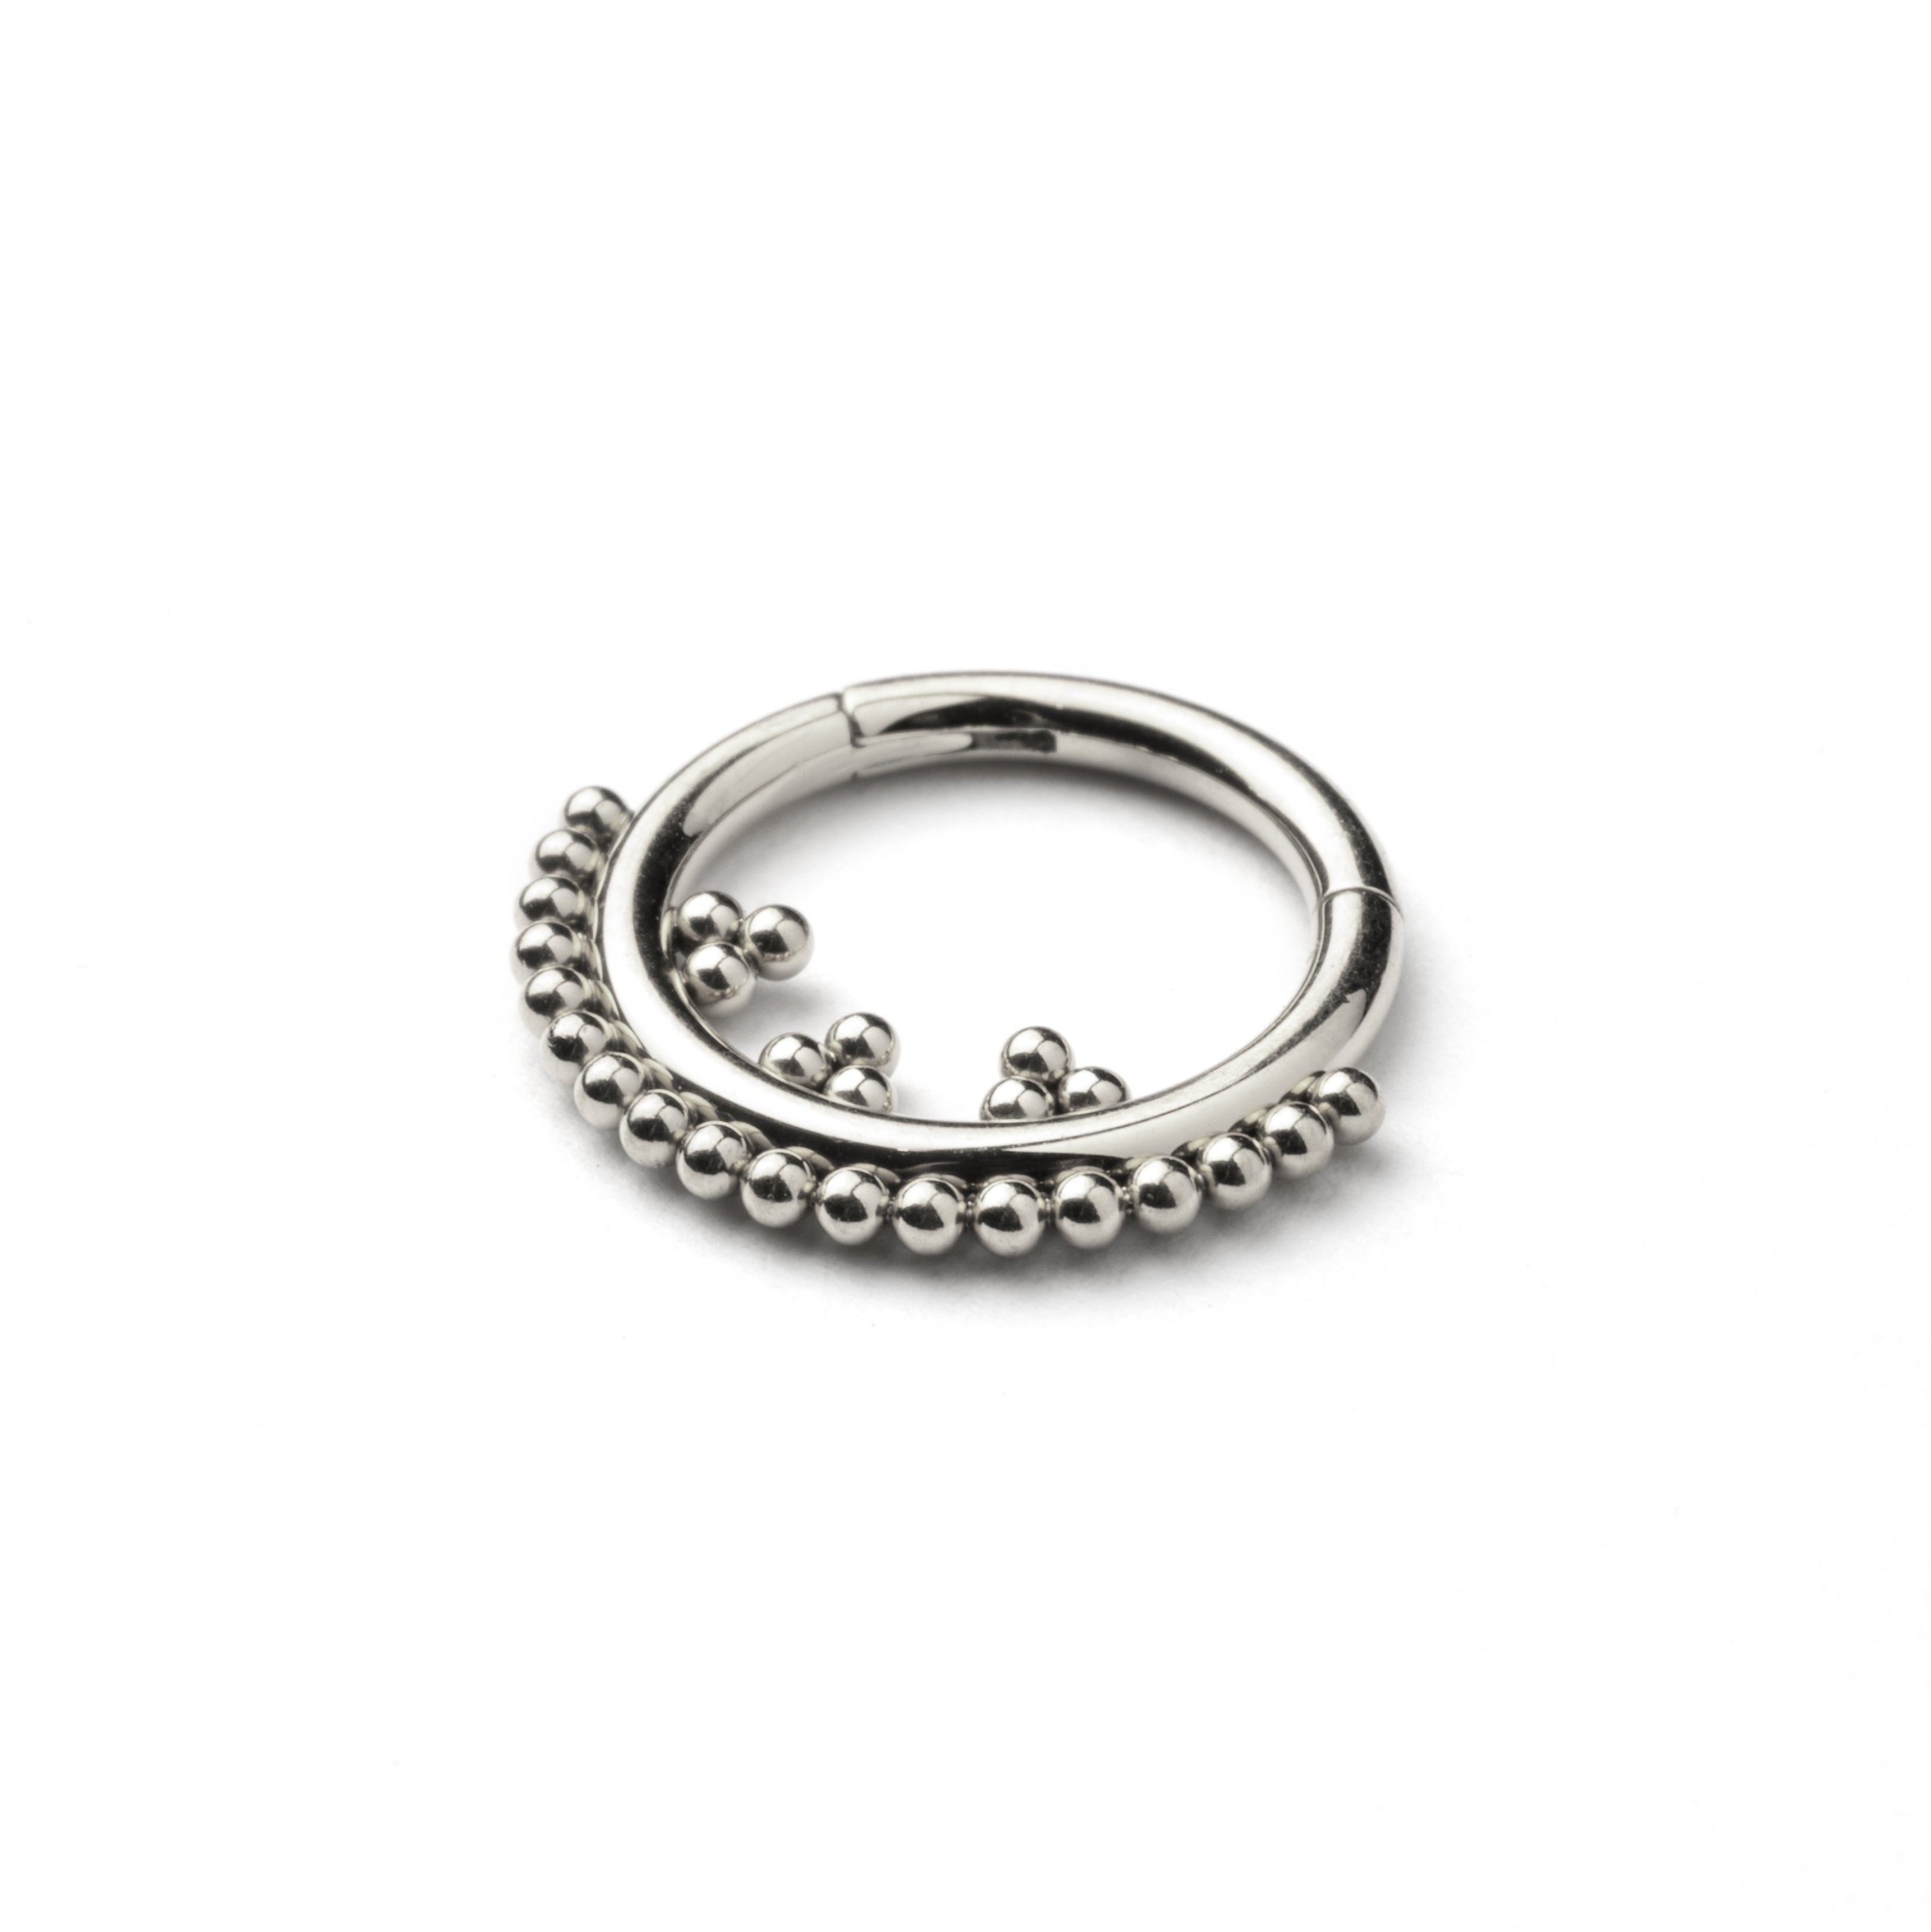 Orbit surgical steel septum clicker with dots ornaments left side view